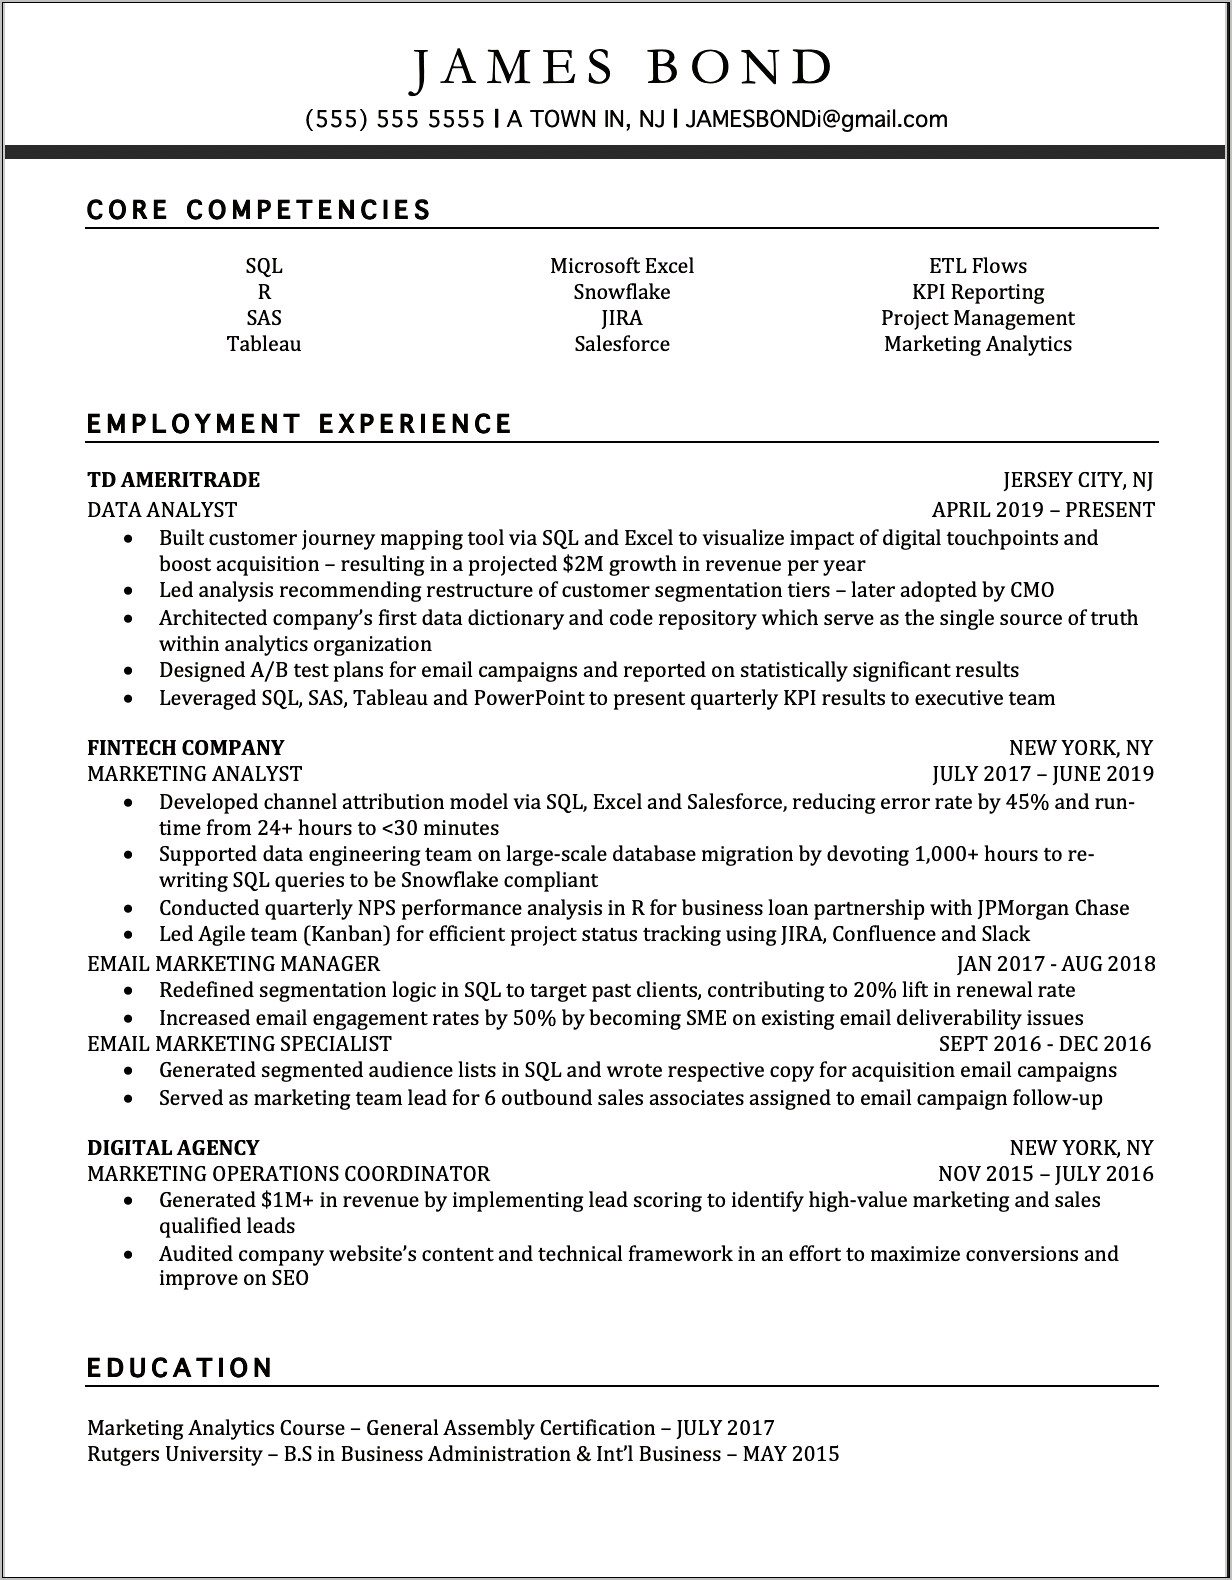 Resume Work Experience Multiple Positions With Same Compnay